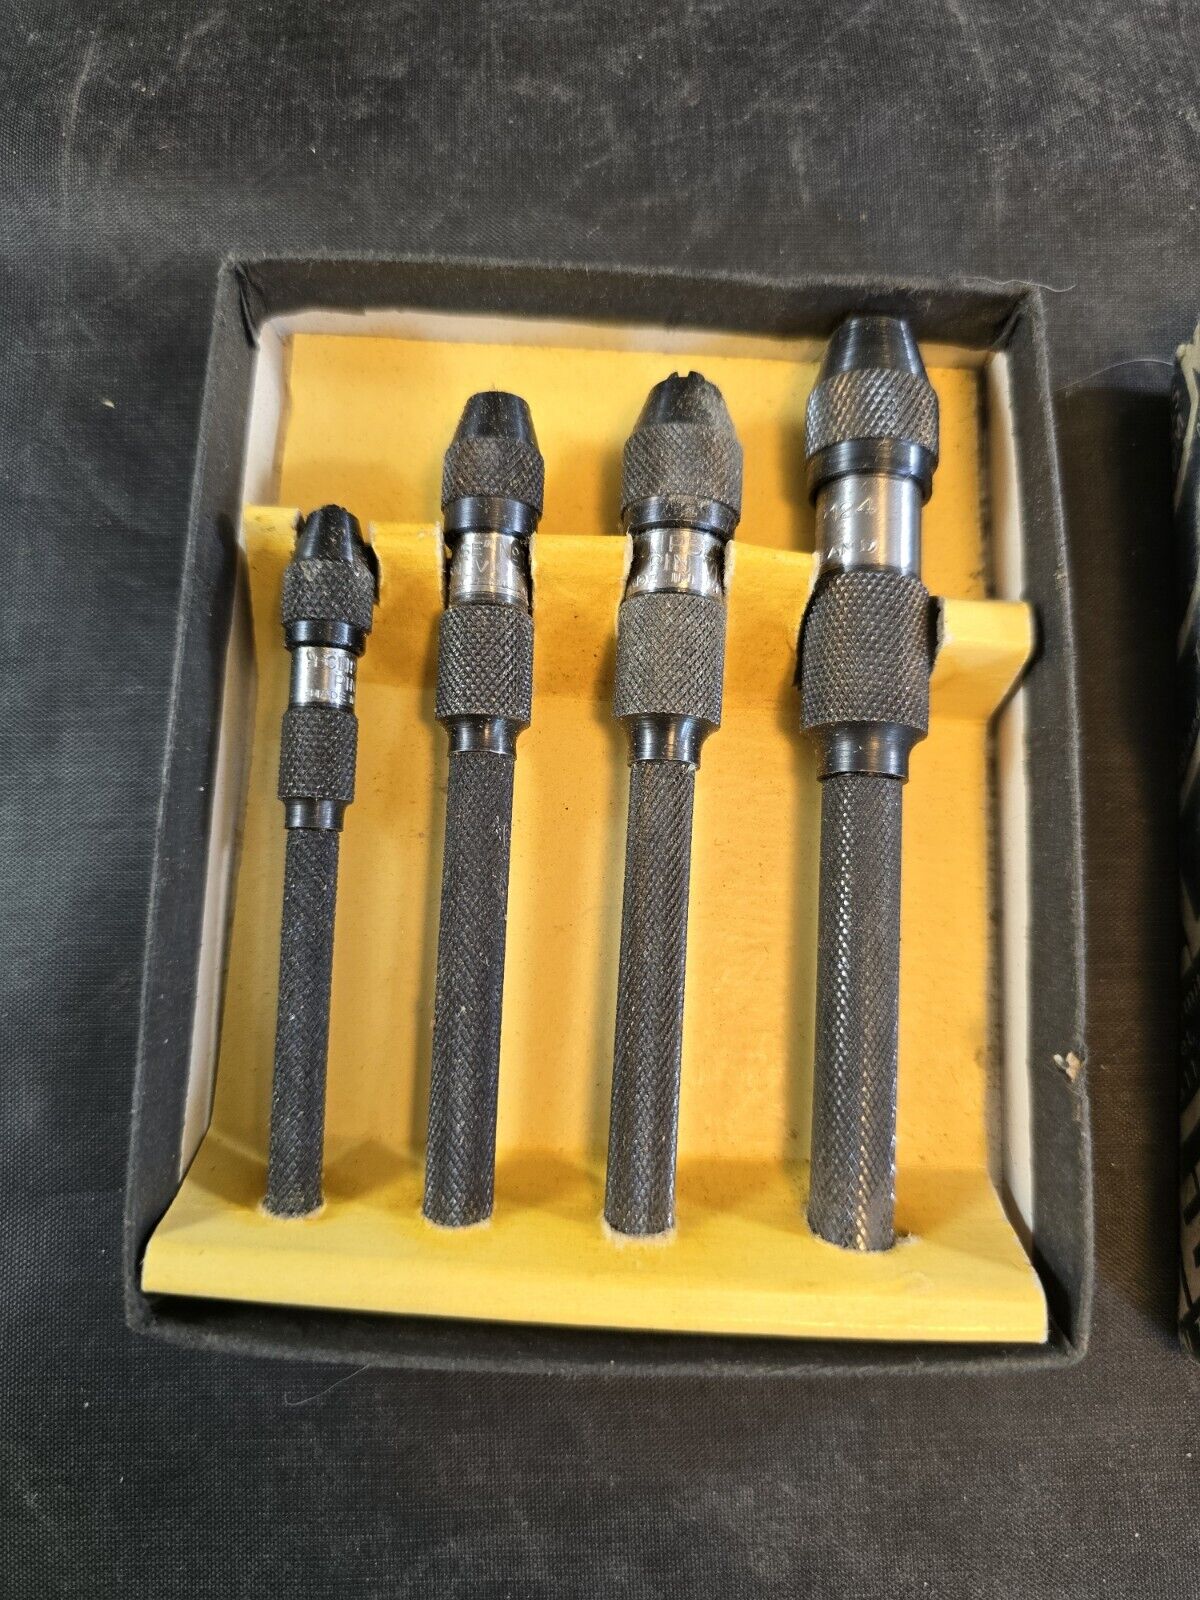 Eclipse Pin Vise Set of (4) Machinist Neill Tools Sheffield, England # 121 - 124